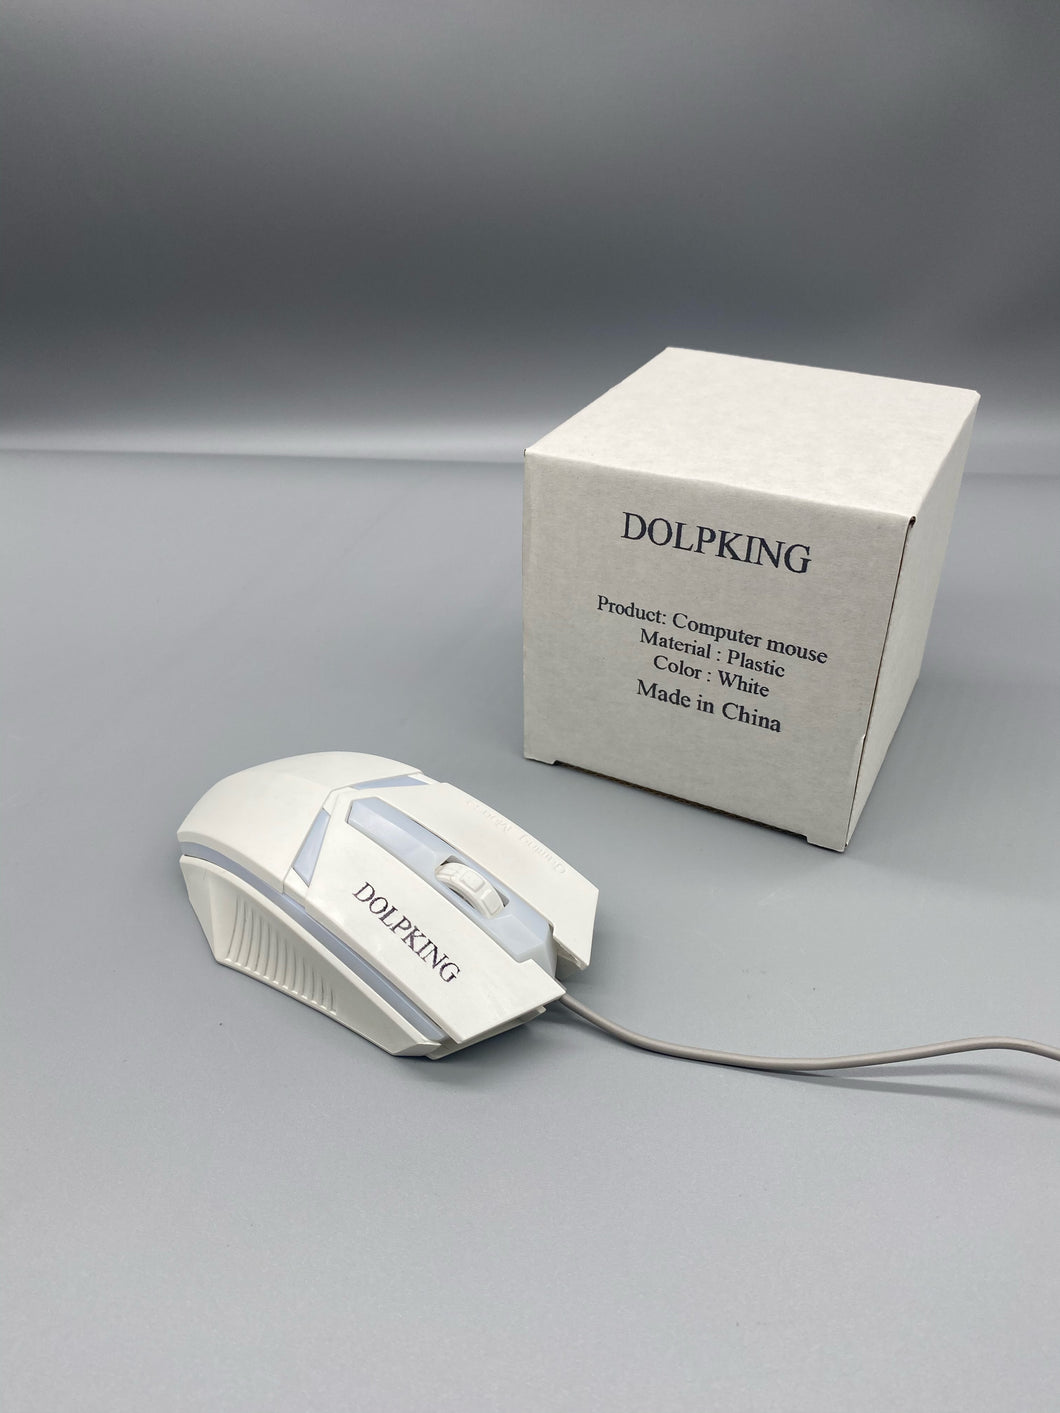 DOLPKING Computer mouse,Wired Computer Mouse - Corded USB Mouse for Laptops and PCs - Right or Left Hand Use.